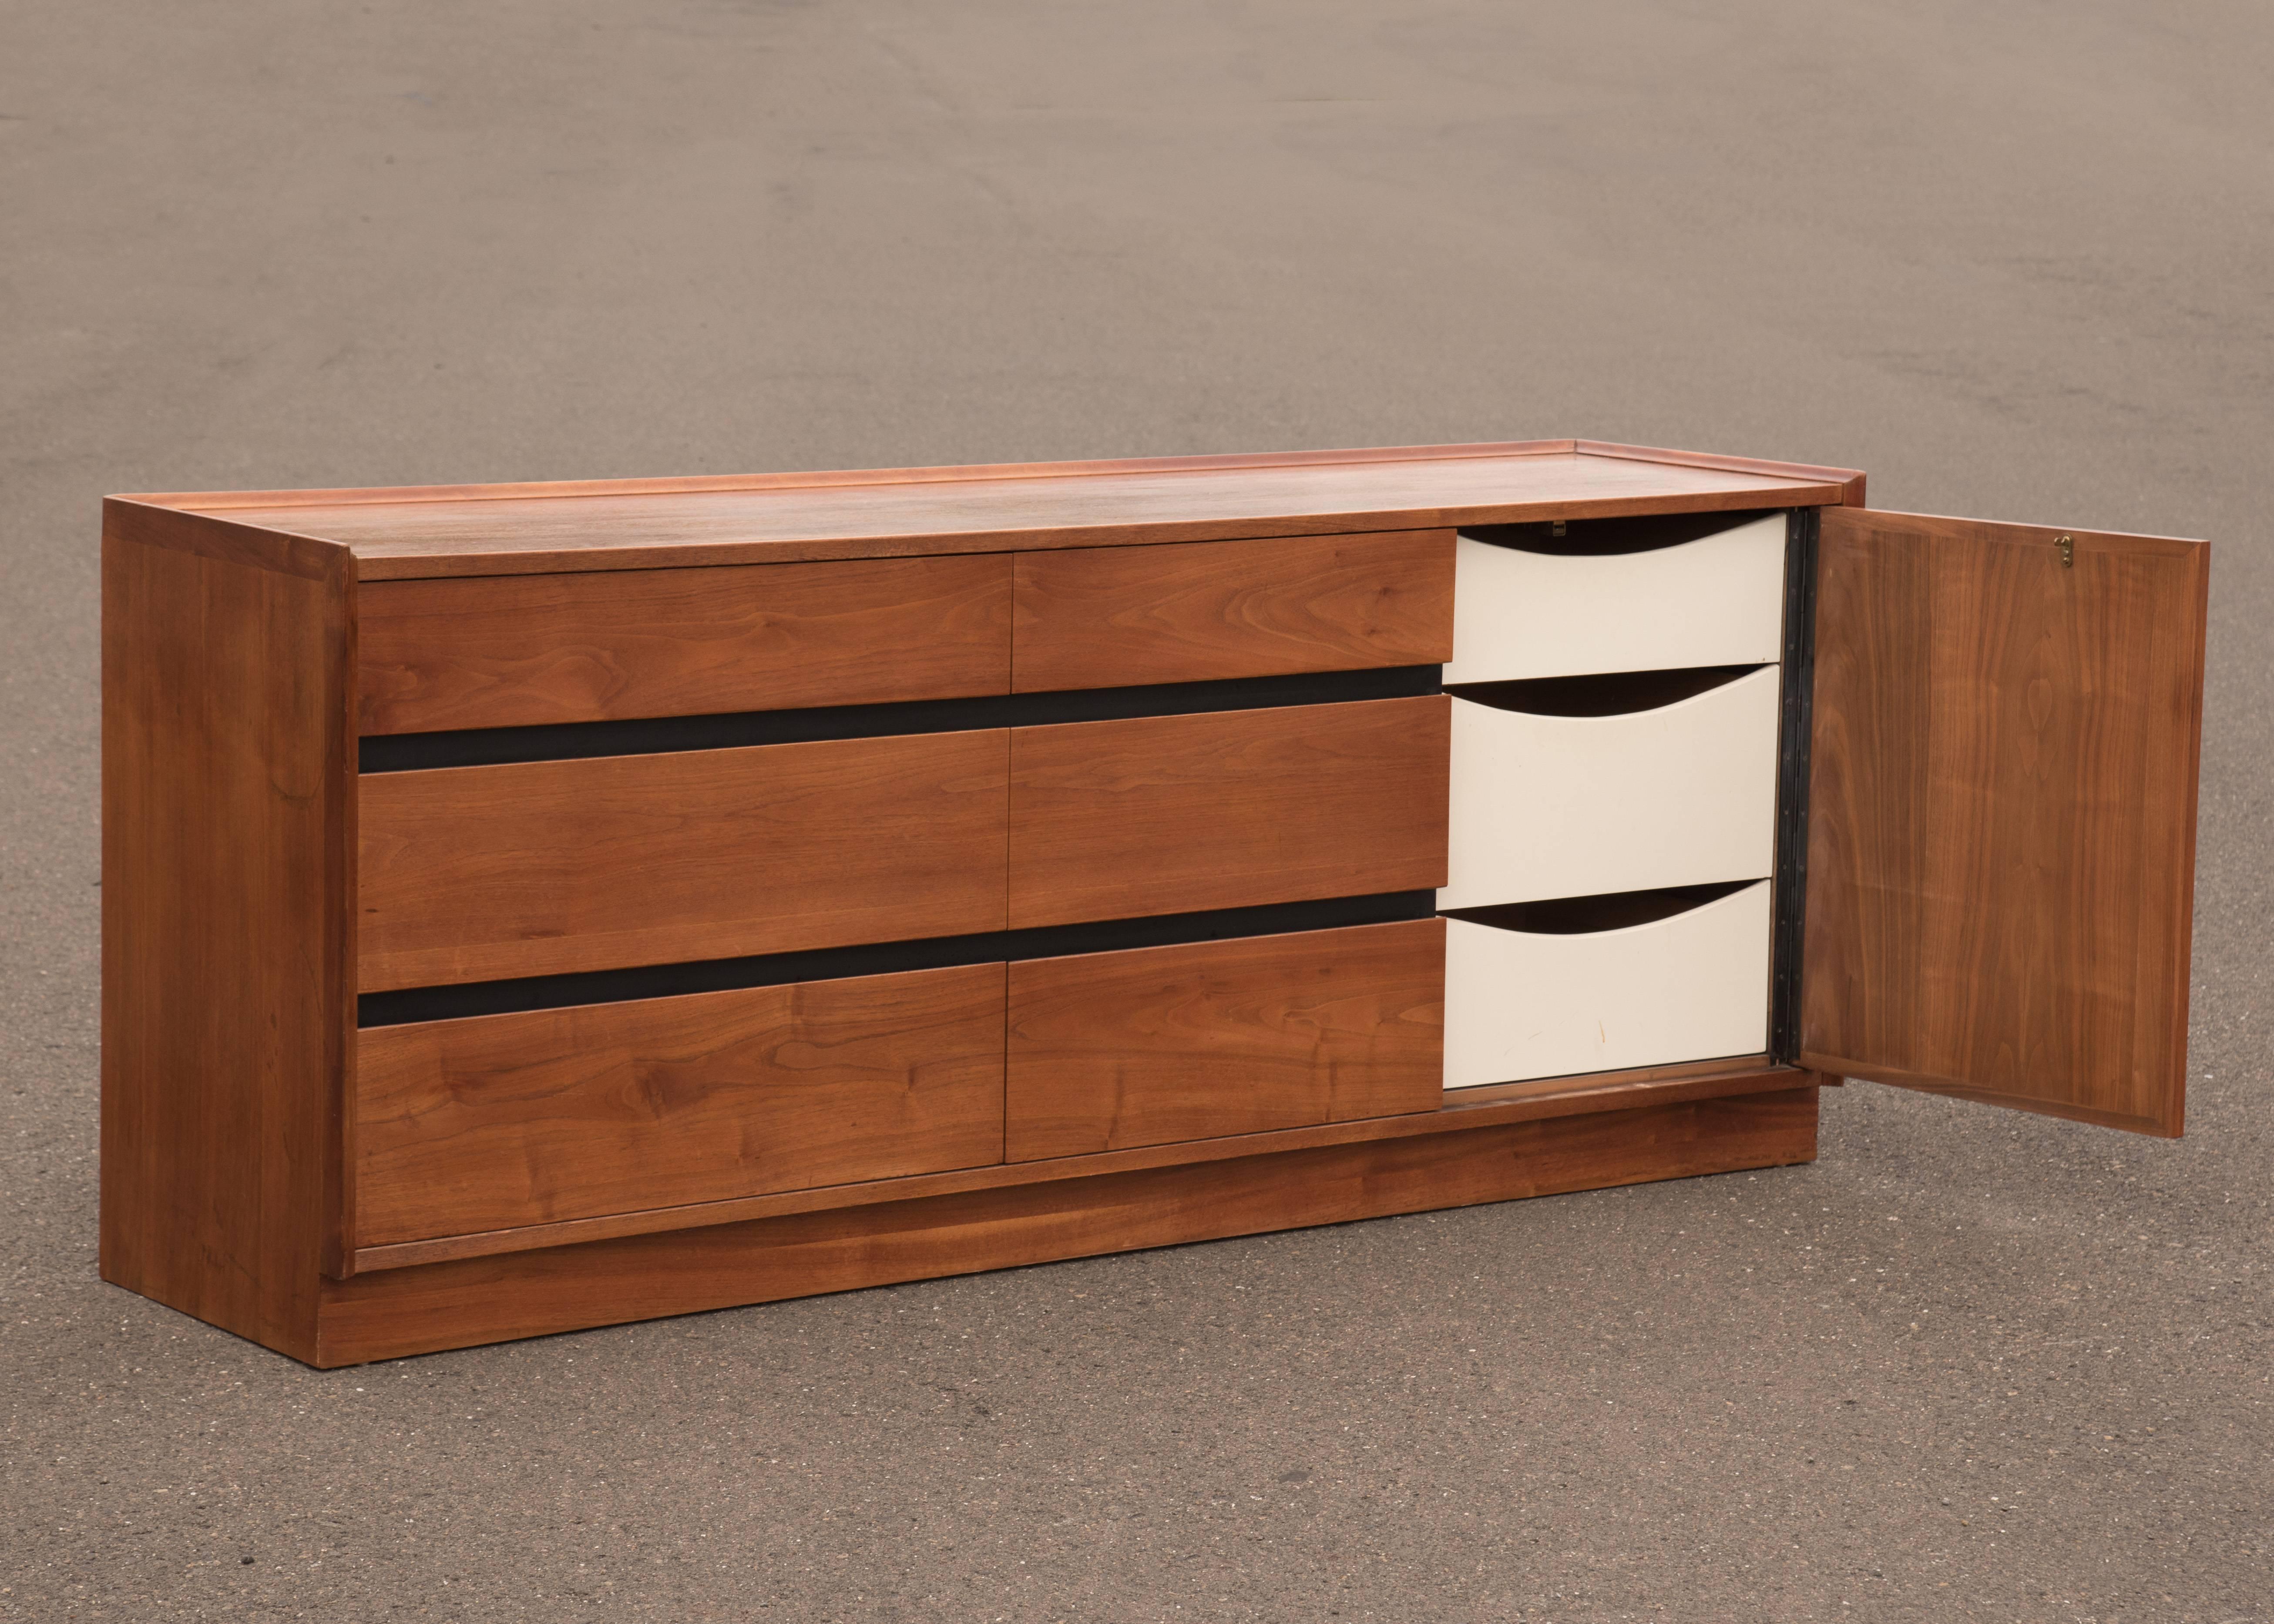 Beautiful Mid-Century Modern dresser by the Dillingham furniture company. Six drawers with recessed handles and black framework behind the drawers. Great walnut grain. Excellent restored condition. Matching pieces to set available.
Designed by